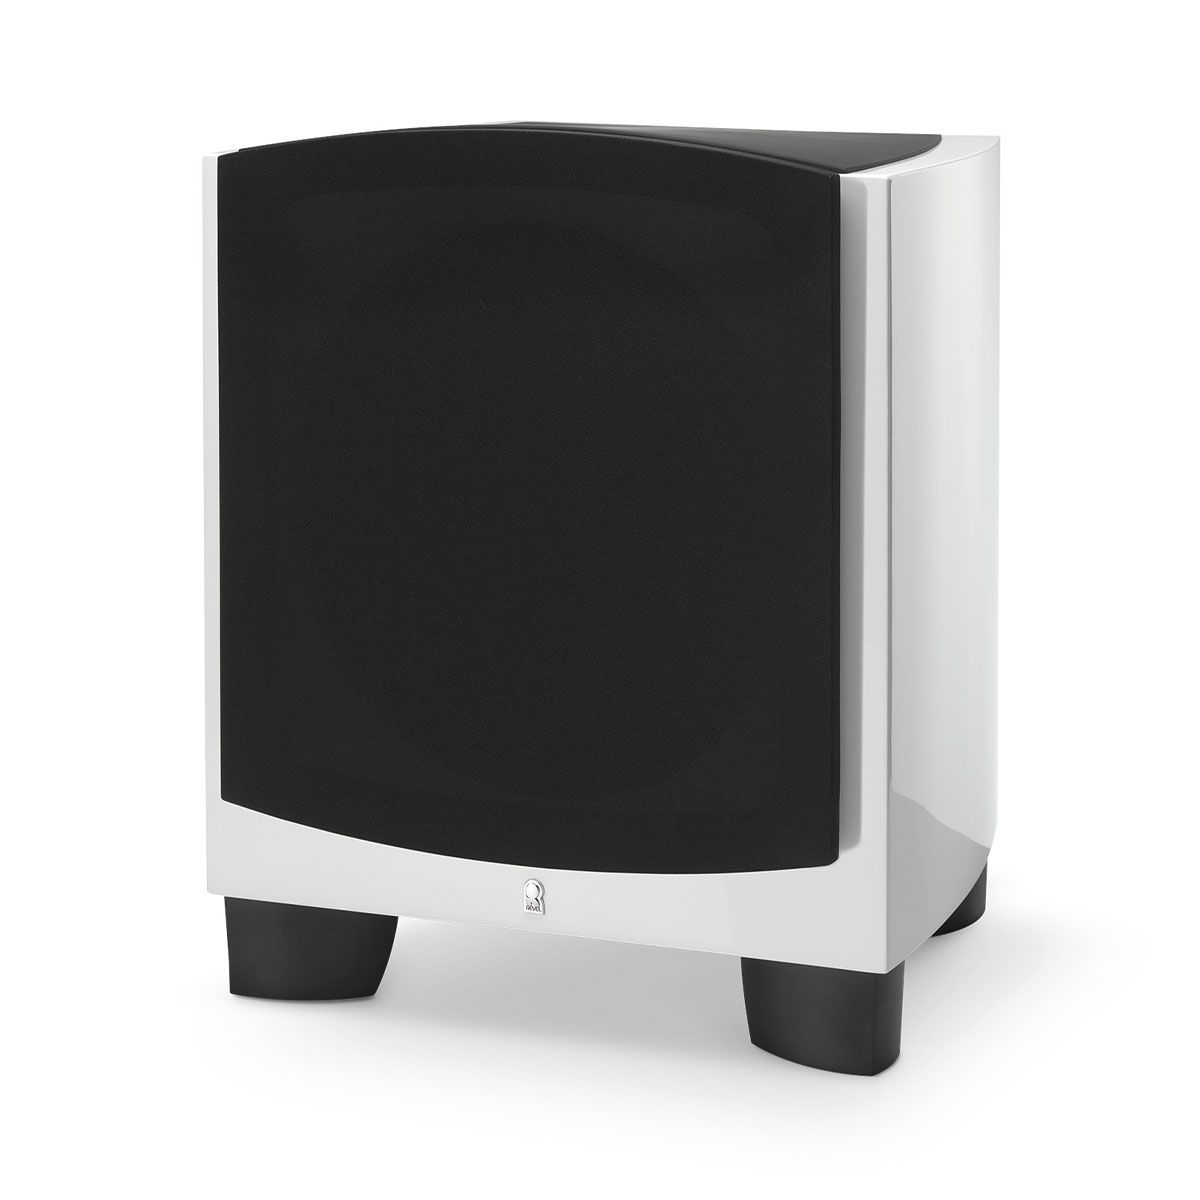 Revel B110v2 10” 1000W Powered Subwoofer - single white with grille - angled front view